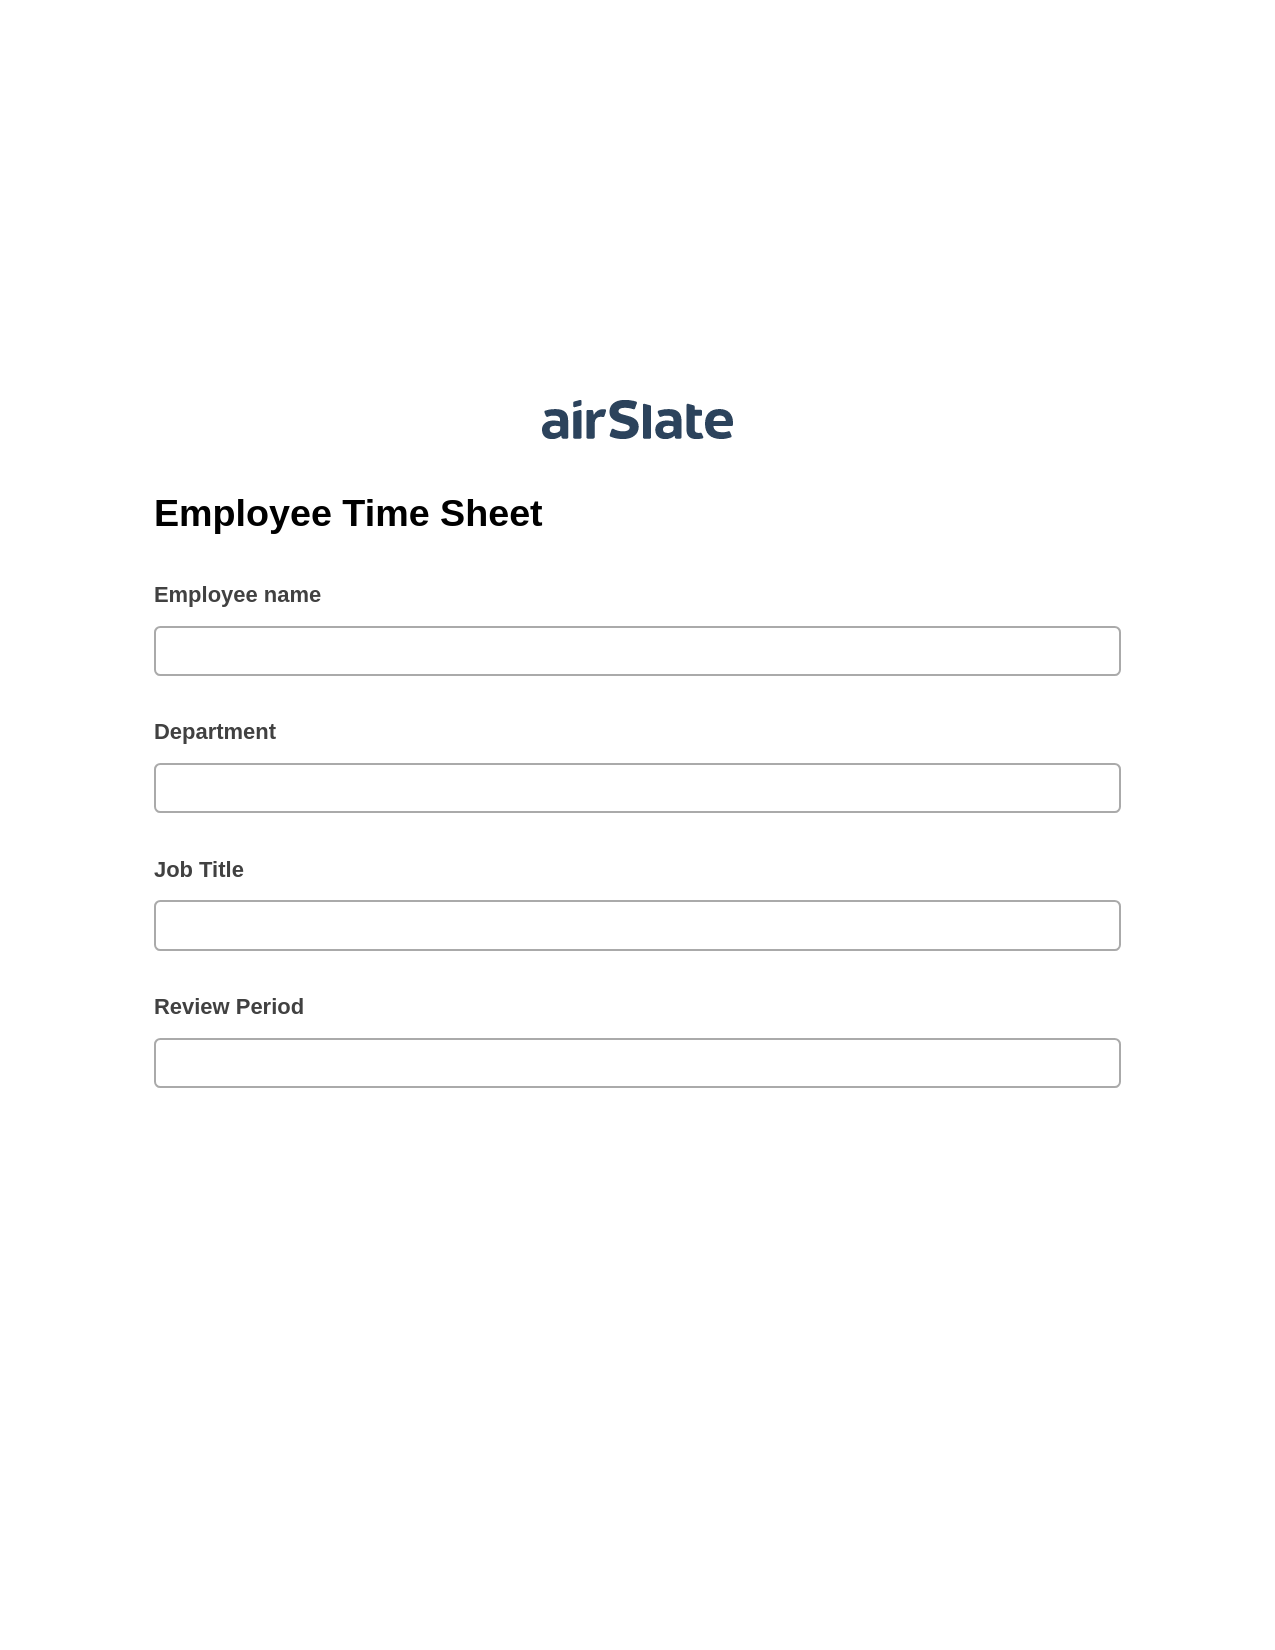 Employee Time Sheet Pre-fill from CSV File Bot, Create slate addon, Export to MySQL Bot